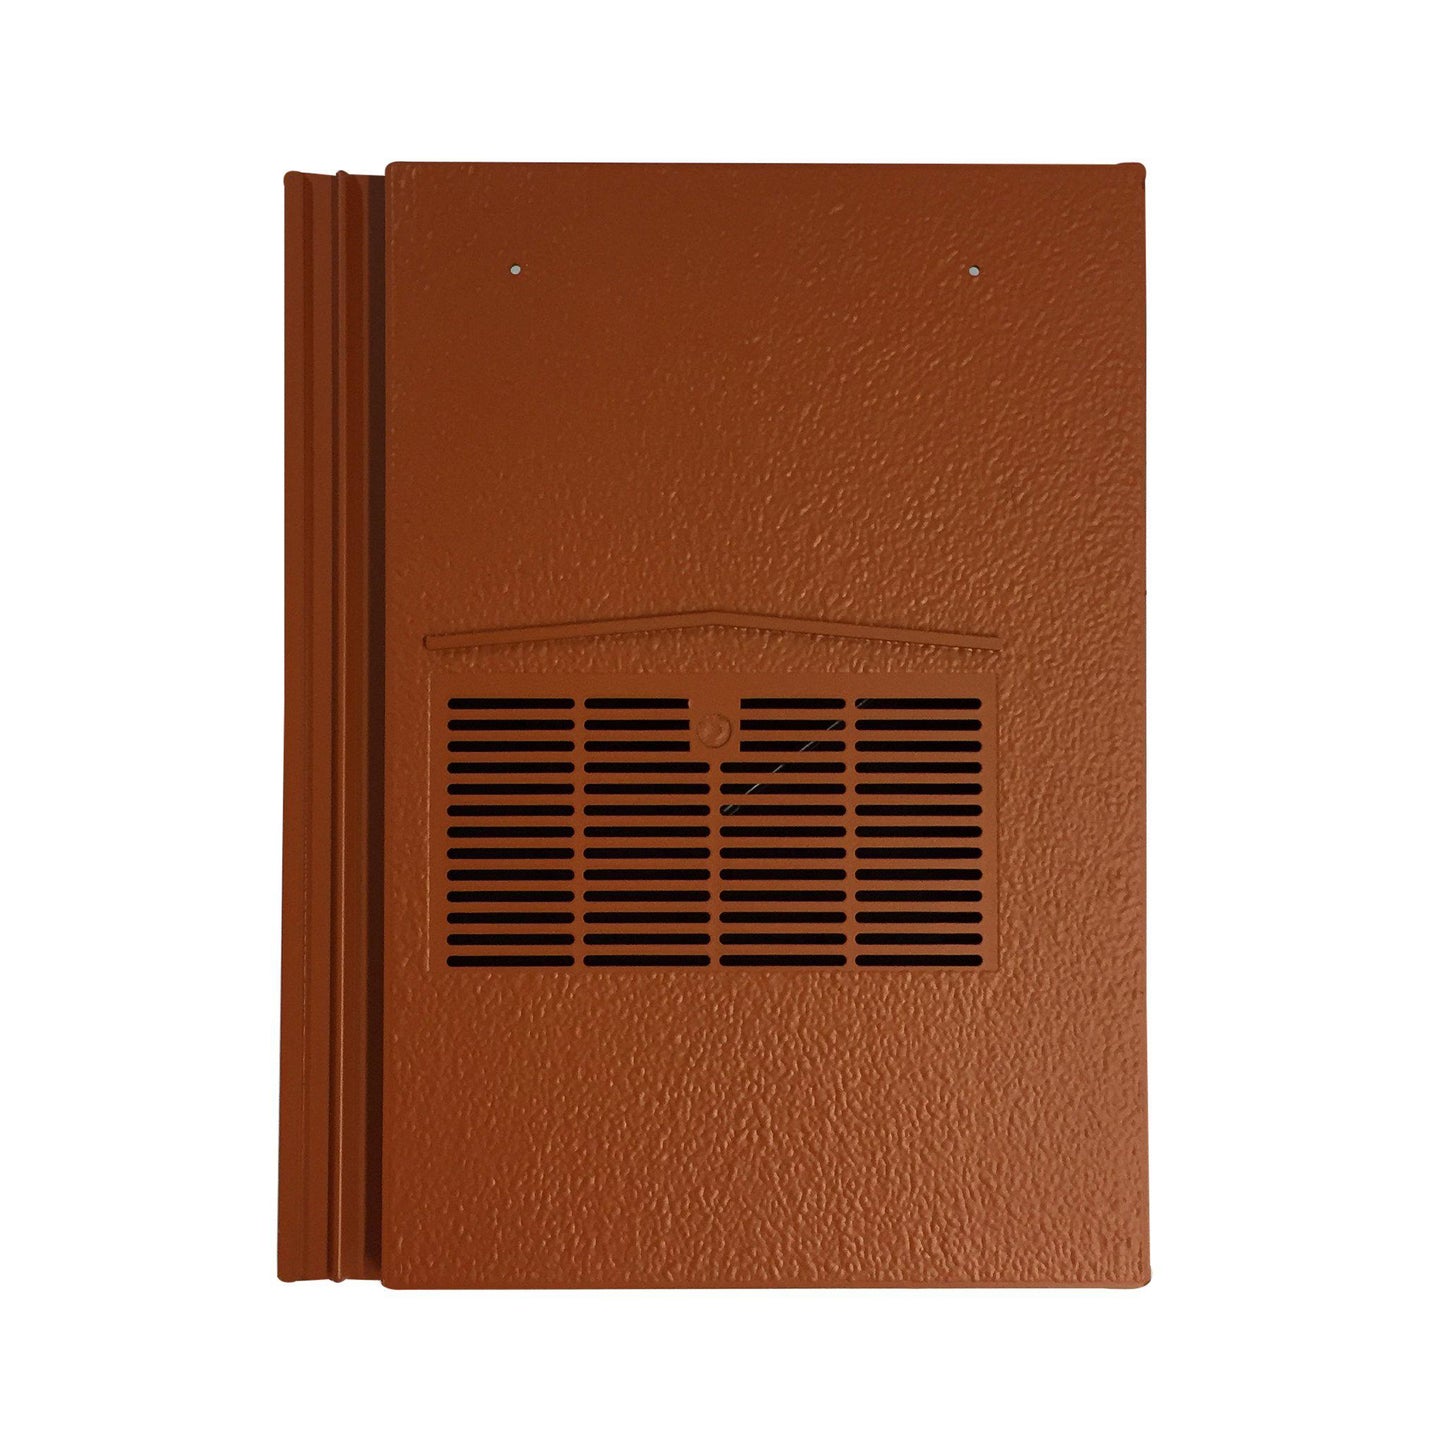 Marley Modern Vent Tile Mosborough Red / Terracotta Smooth - Beddoes Products